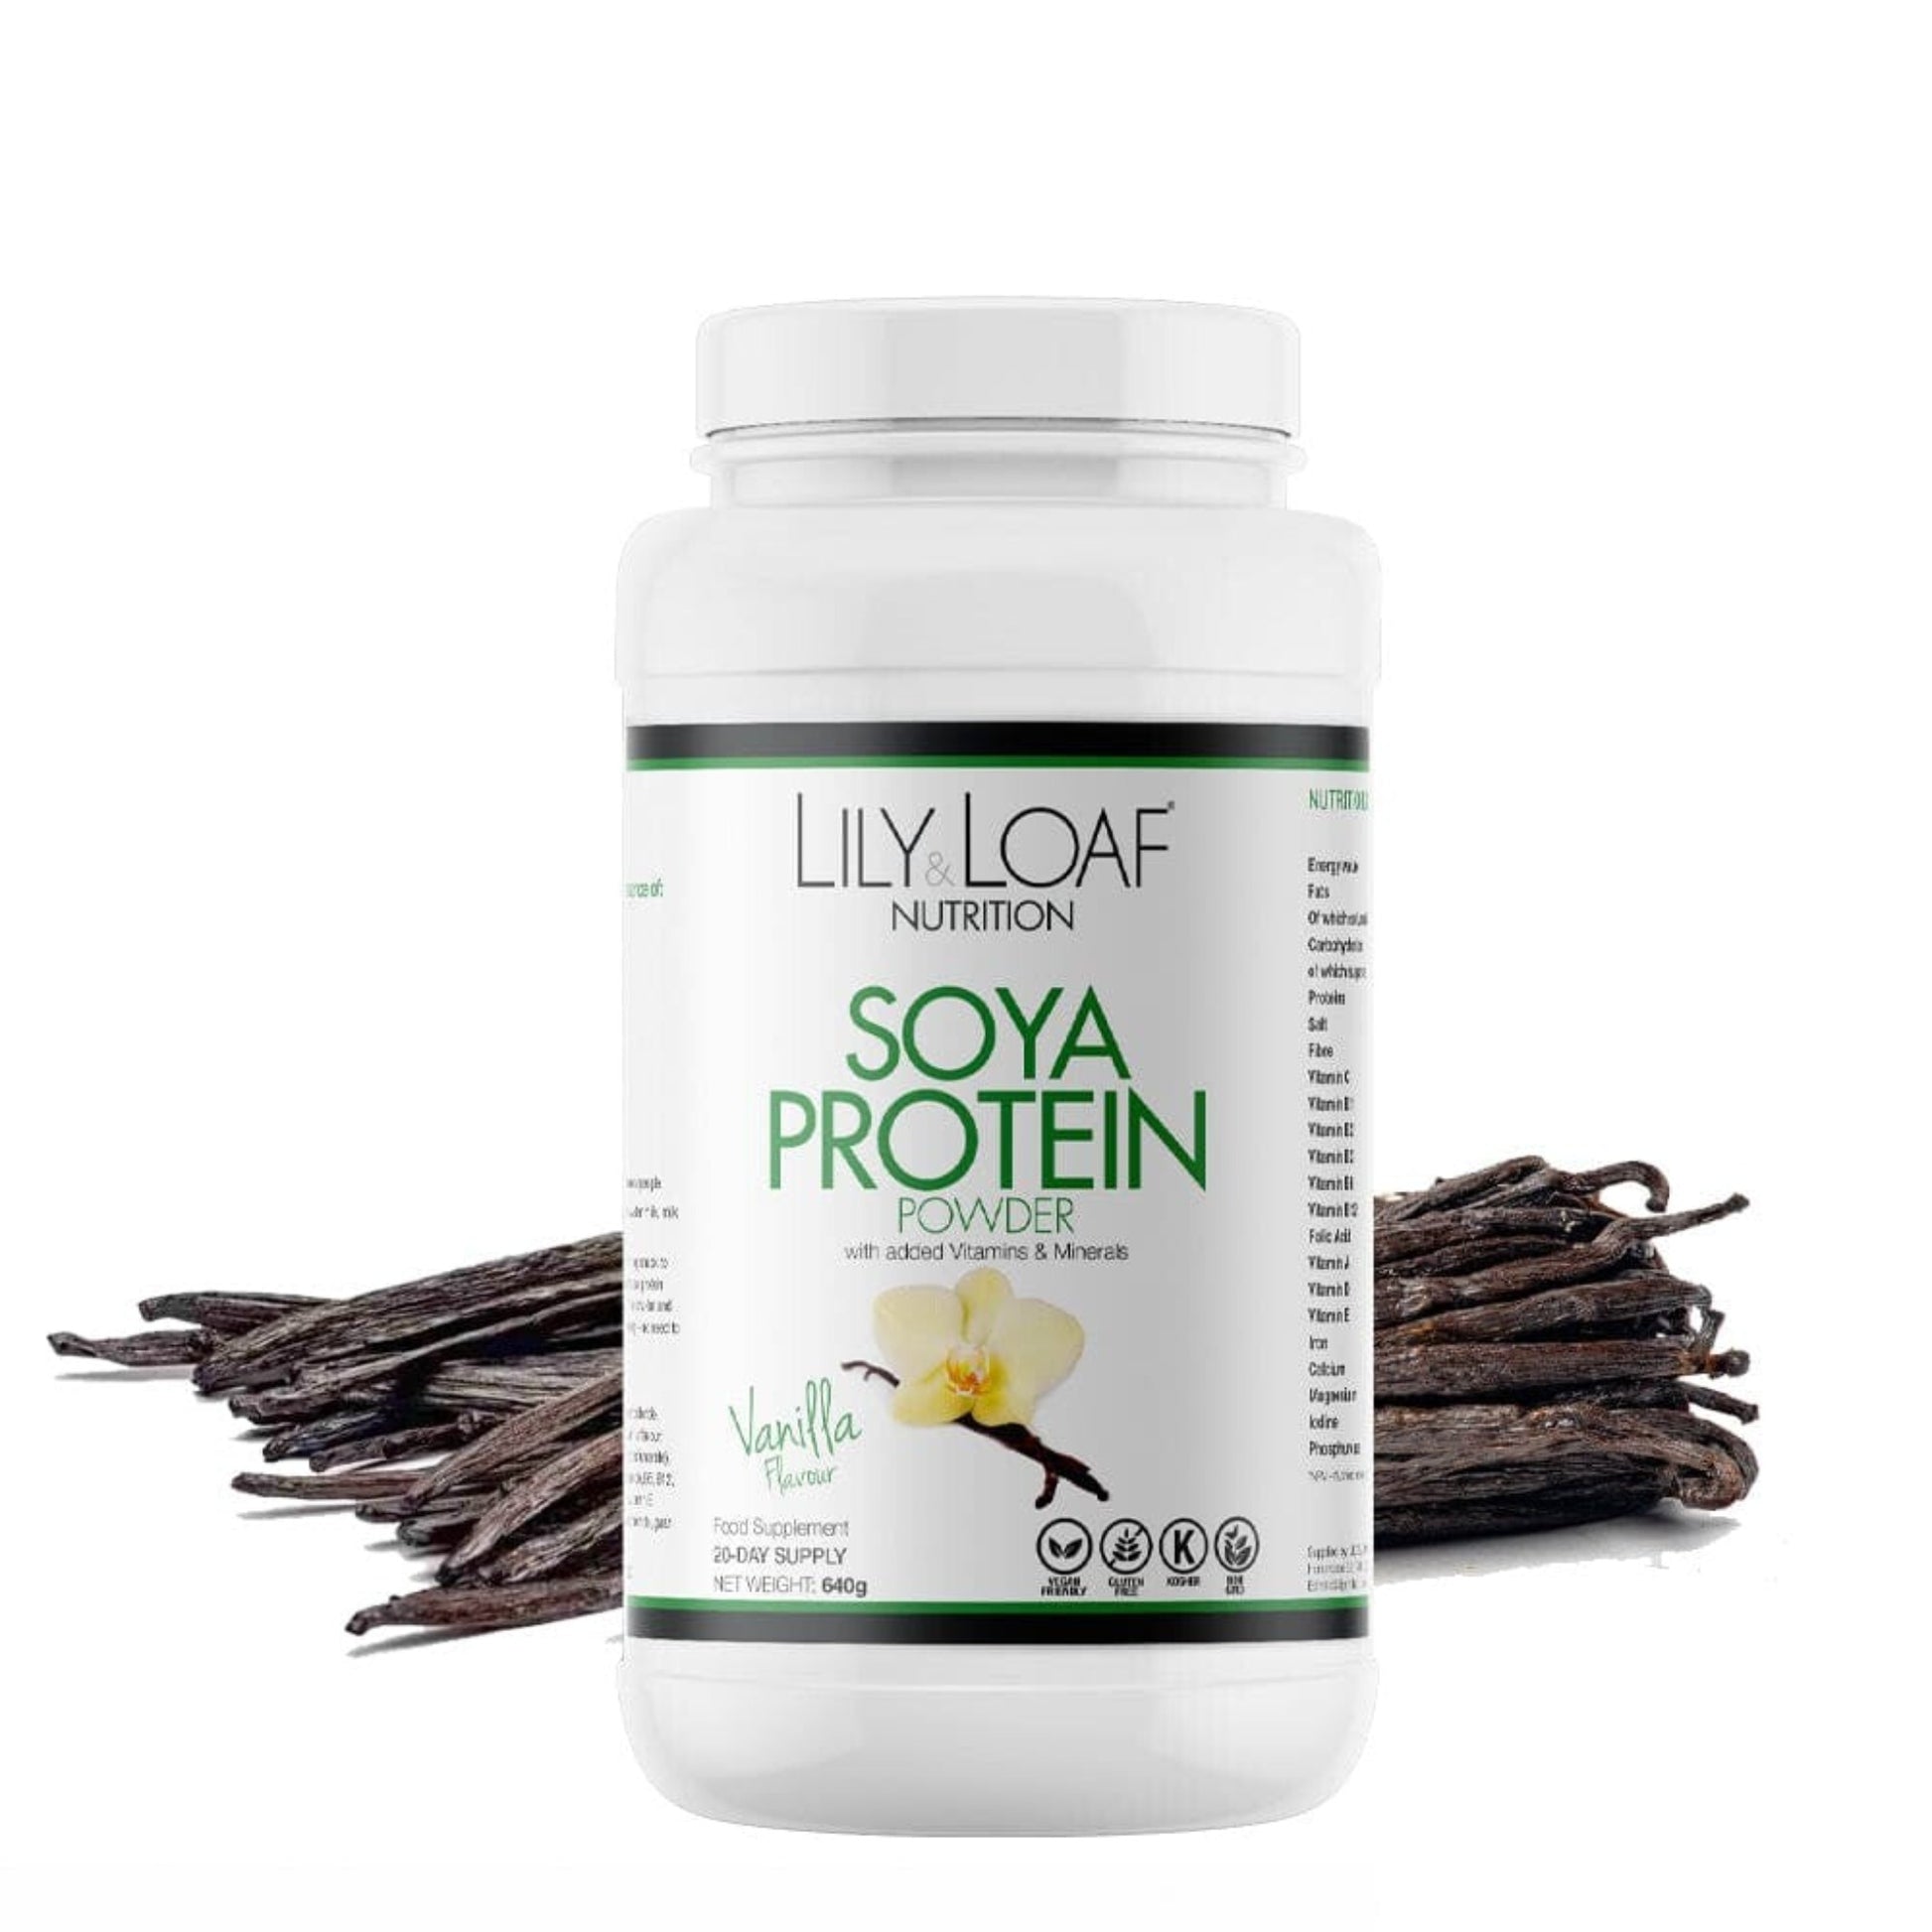 Lily & Loaf Soya Protein+ With Vitamins & Minerals - Vanilla Flavour Powder